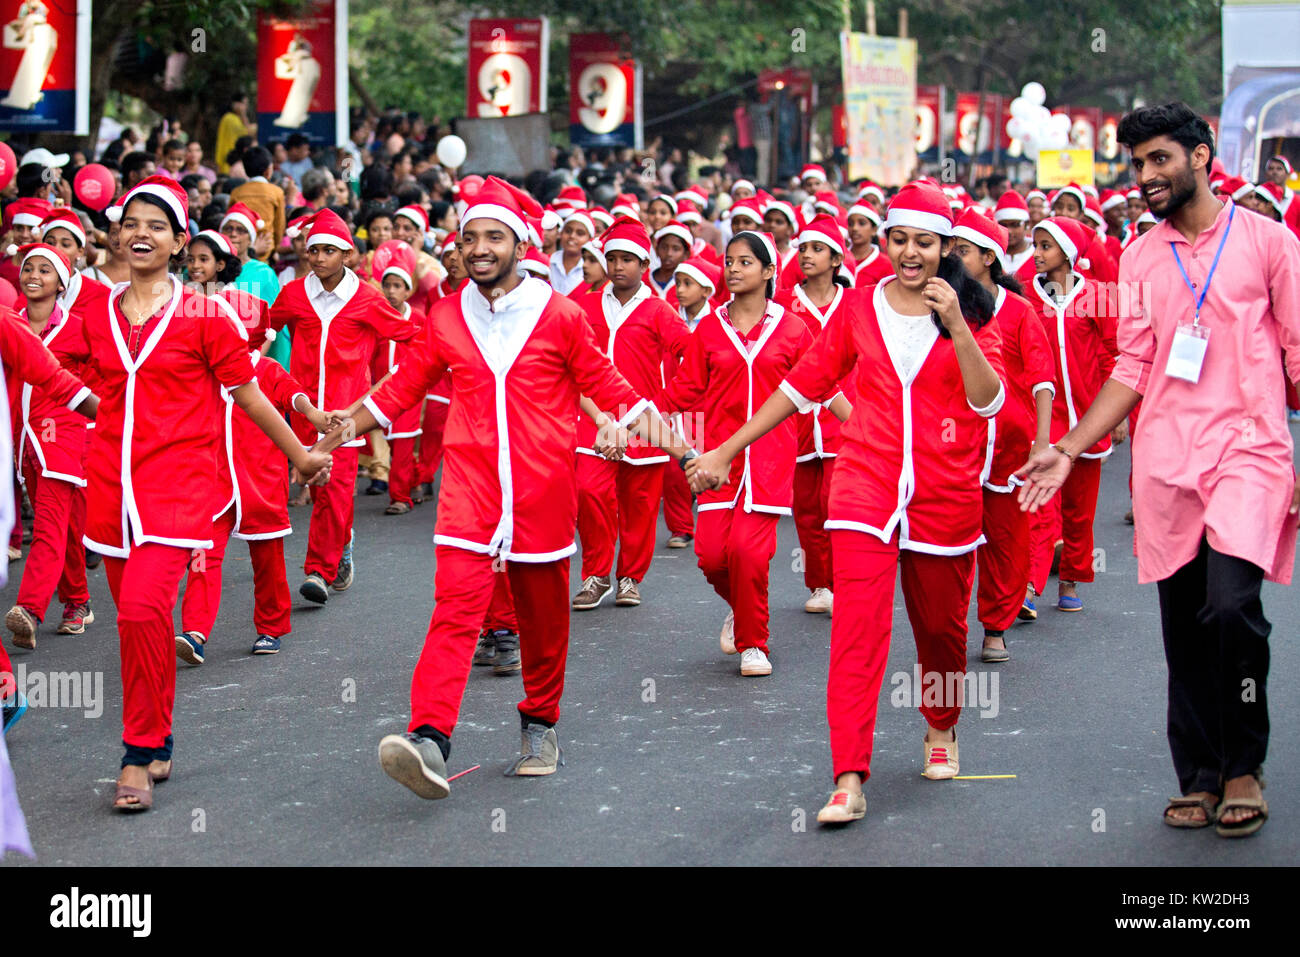 Buon Natale 2020 Thrissur.Buon Natale Thrissur High Resolution Stock Photography And Images Alamy